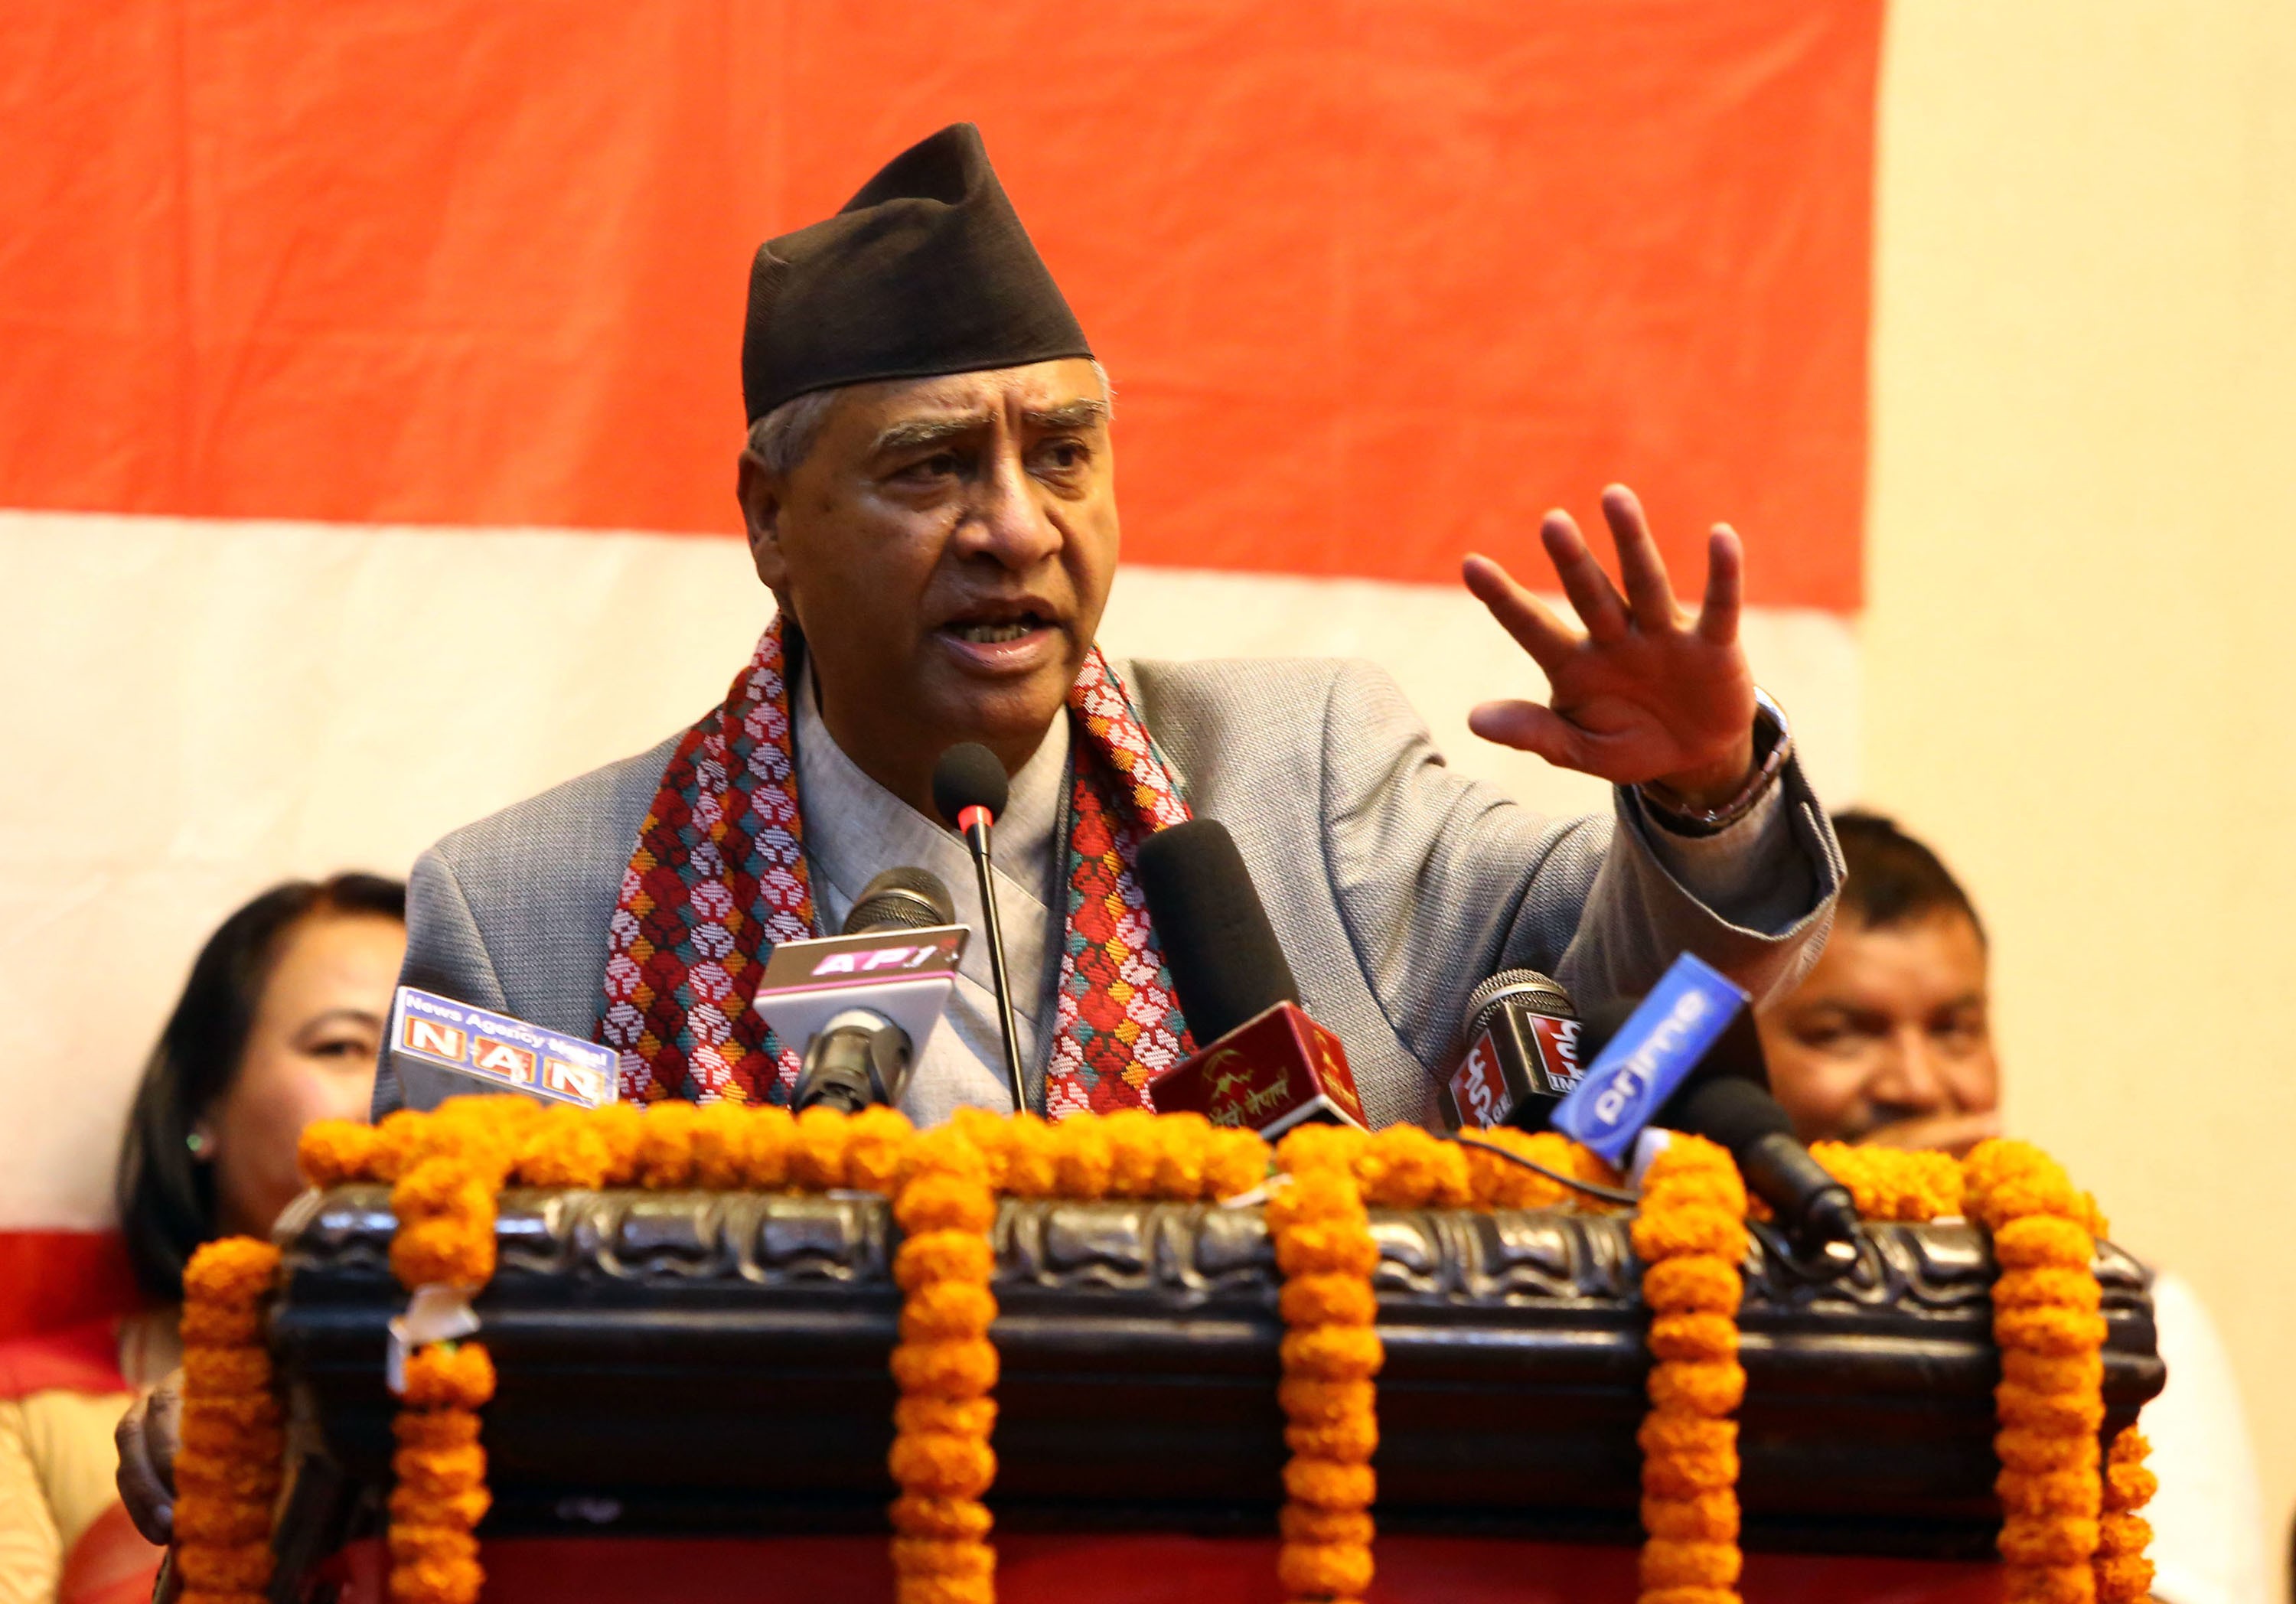 government-trying-to-control-democratic-norms-and-values-deuba